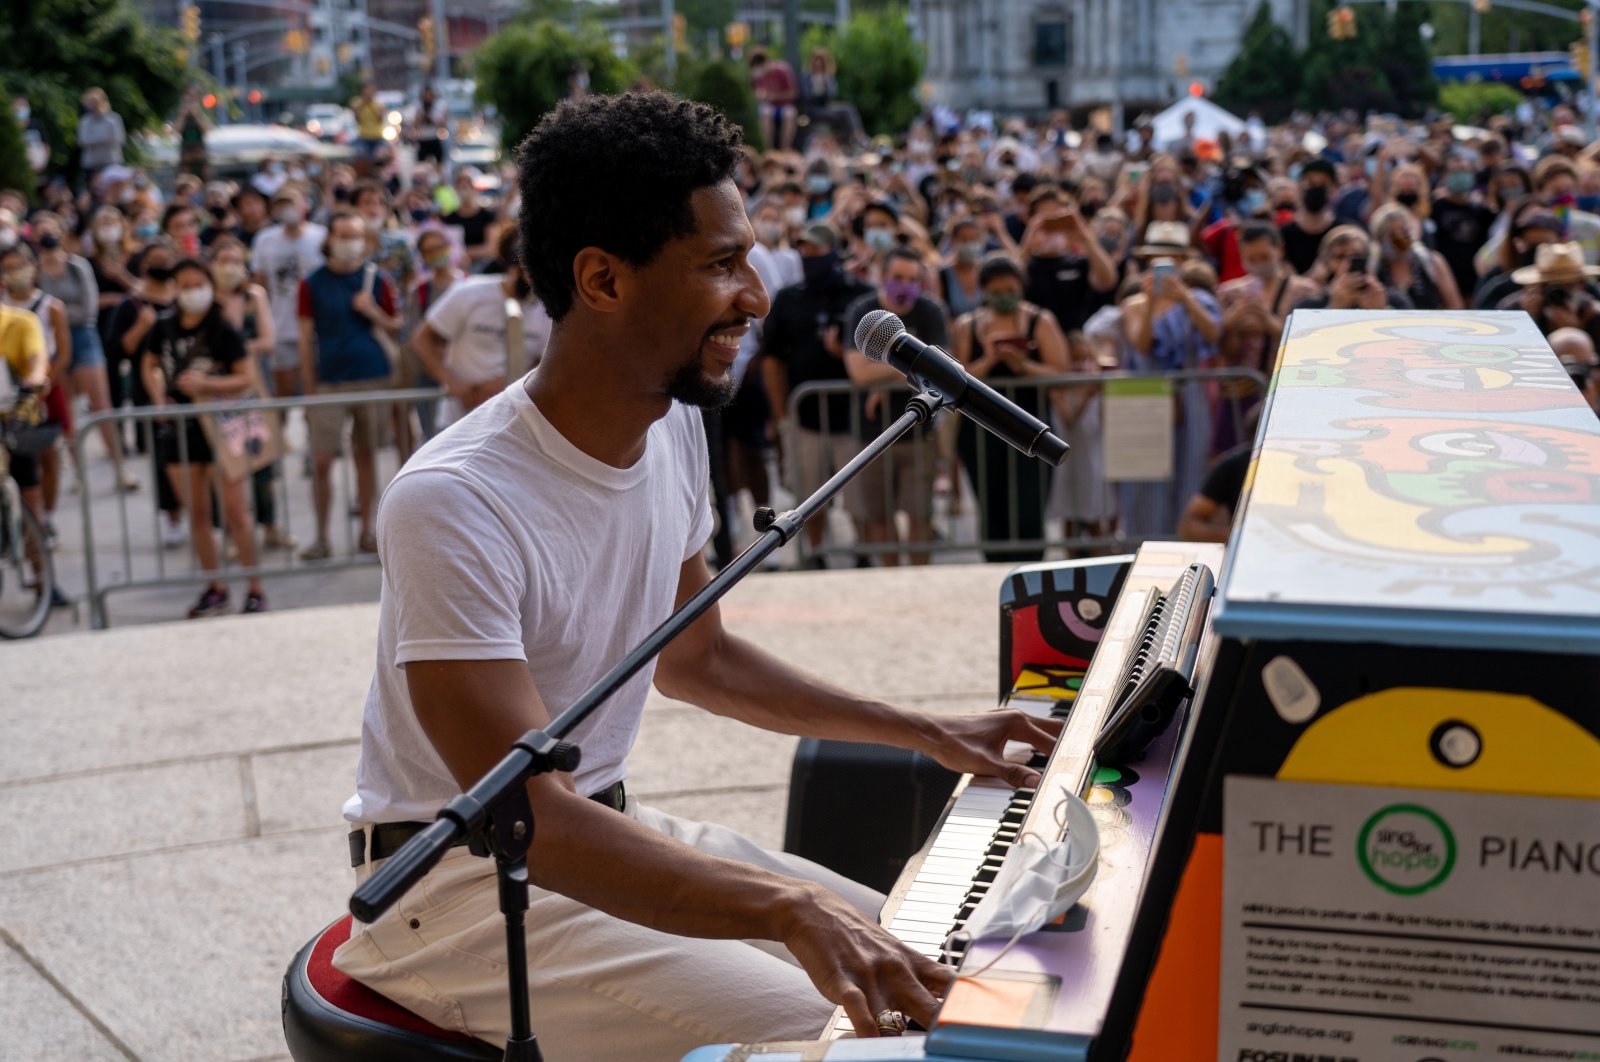 Musician Jon Batiste performs live in concert on Juneteenth on the steps of the Brooklyn Public Library at the Grand Army Plaza, New York, U.S., June 19, 2020. (Shutterstock Photo)